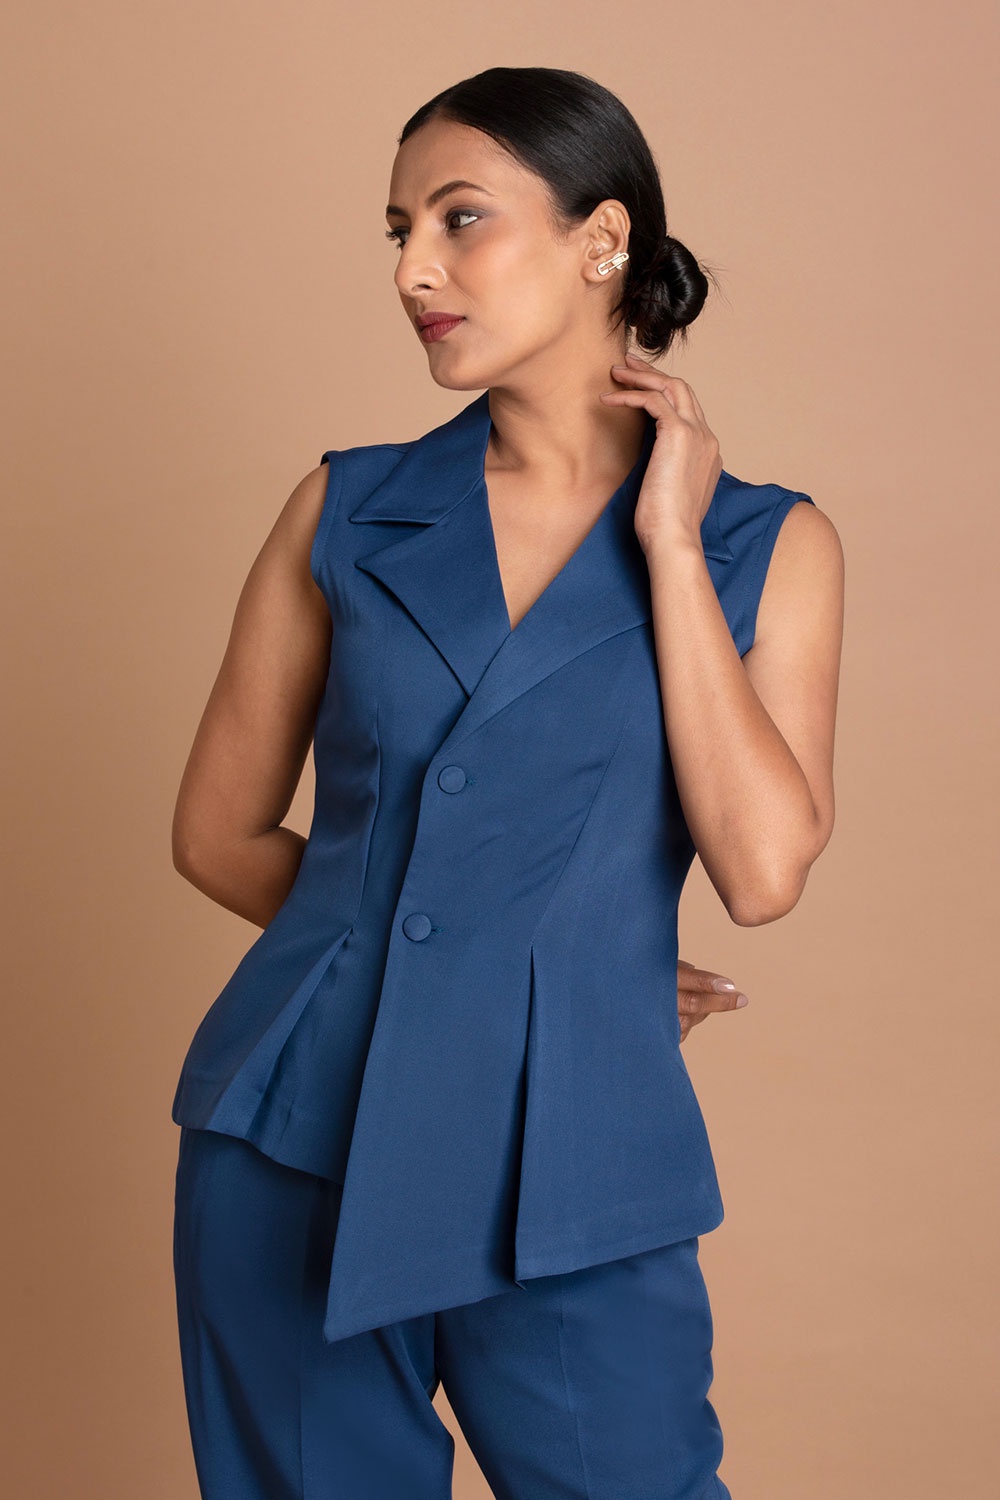 Elevate Your Workwear Wardrobe with Stylish Formal Dresses for Women